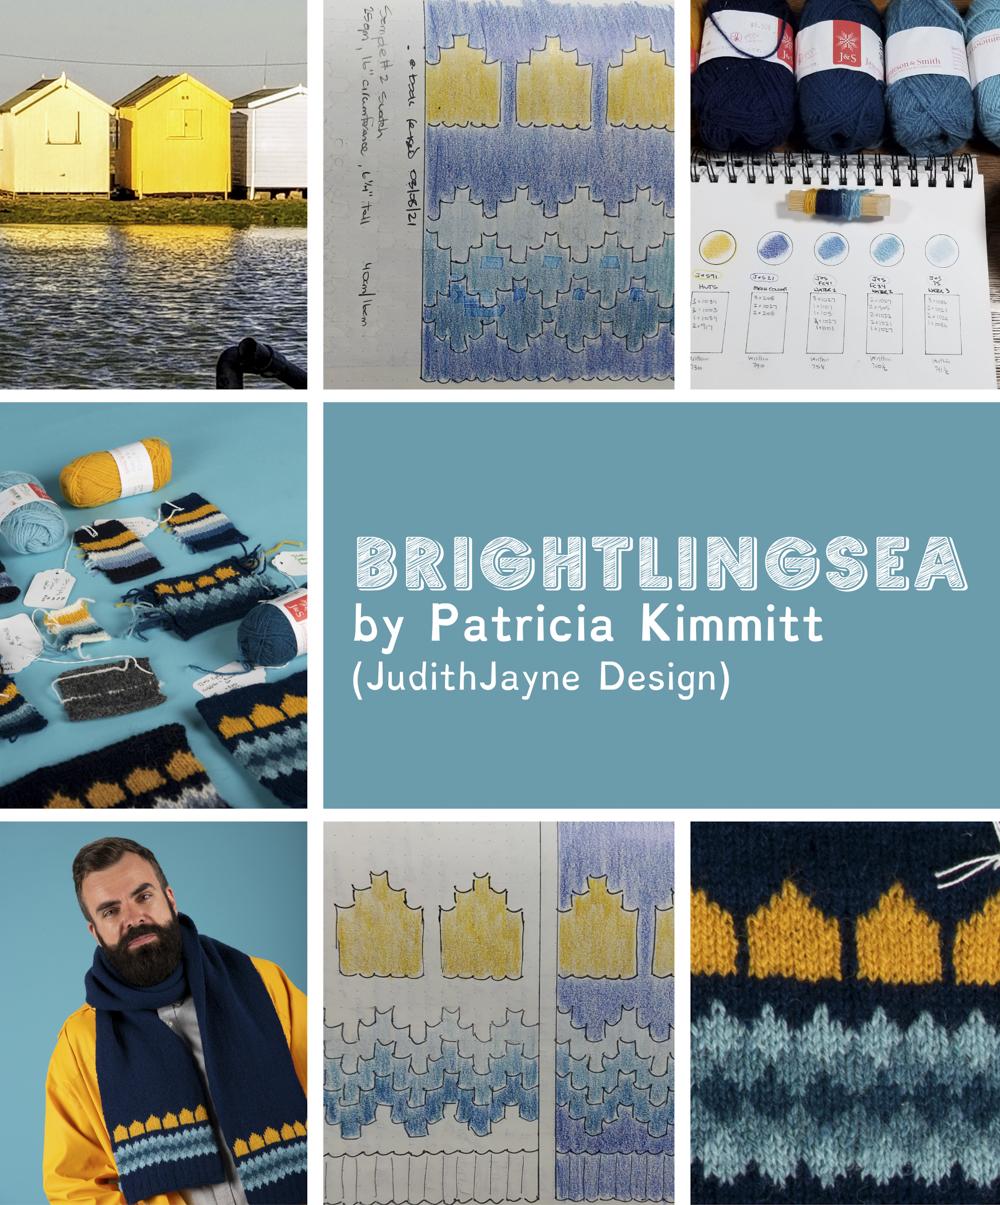 Brightlingsea by Patricia Kimmitt (JudithJayne Design) - composite image in grid-form showing design stages for a scarf inspired by golden yellow beach huts by the sea. As well as the scarf you can see the huts, notepad pages showing the design in progress, swatches and yarn balls